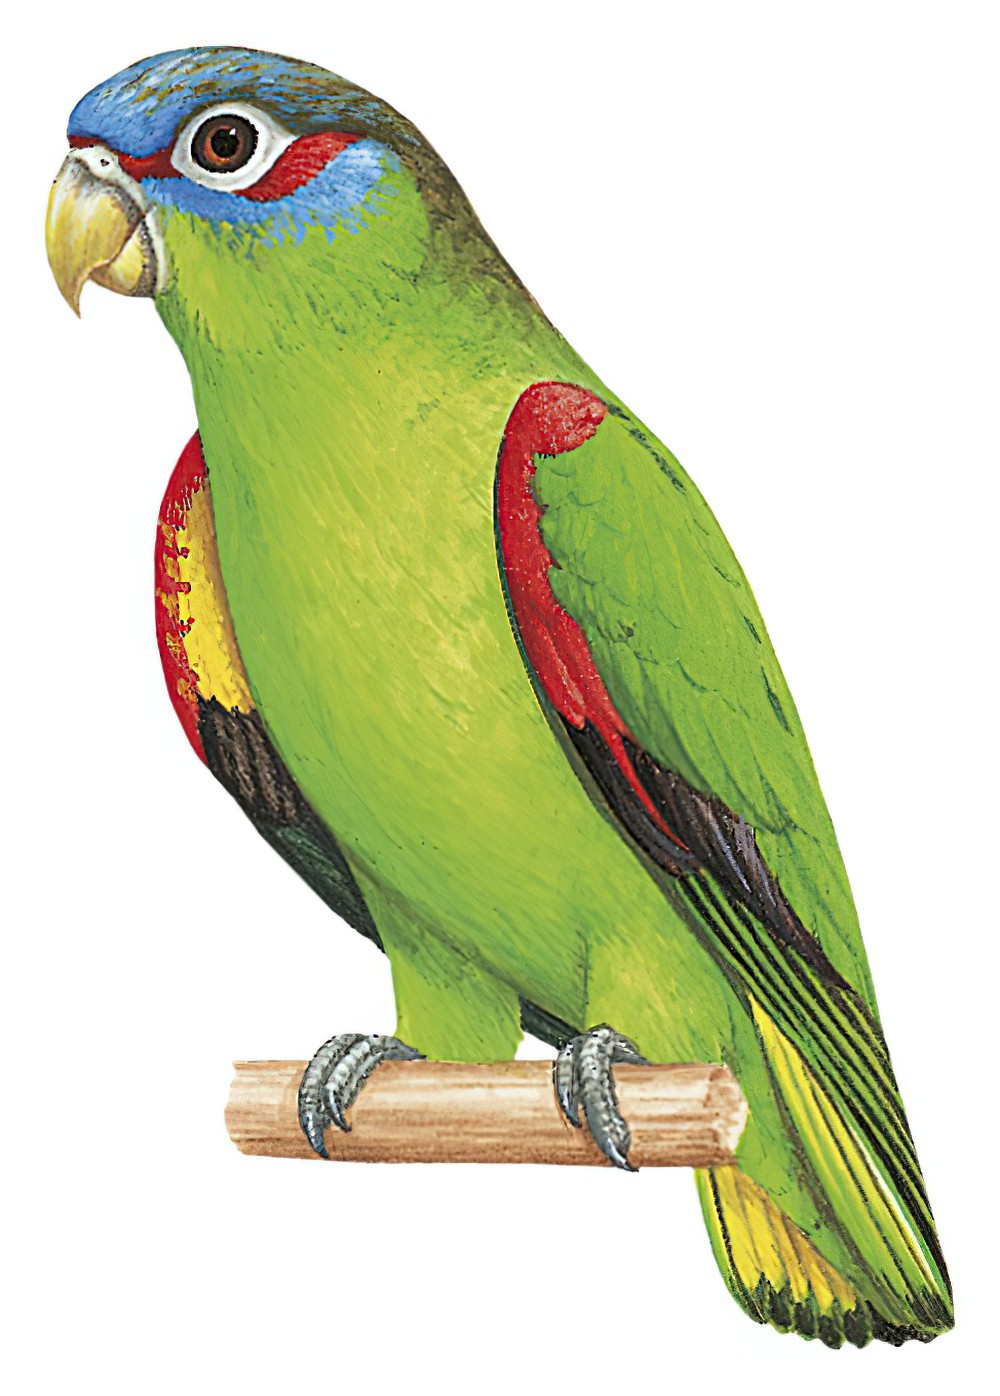 Blue-fronted Parrotlet / Touit dilectissimus